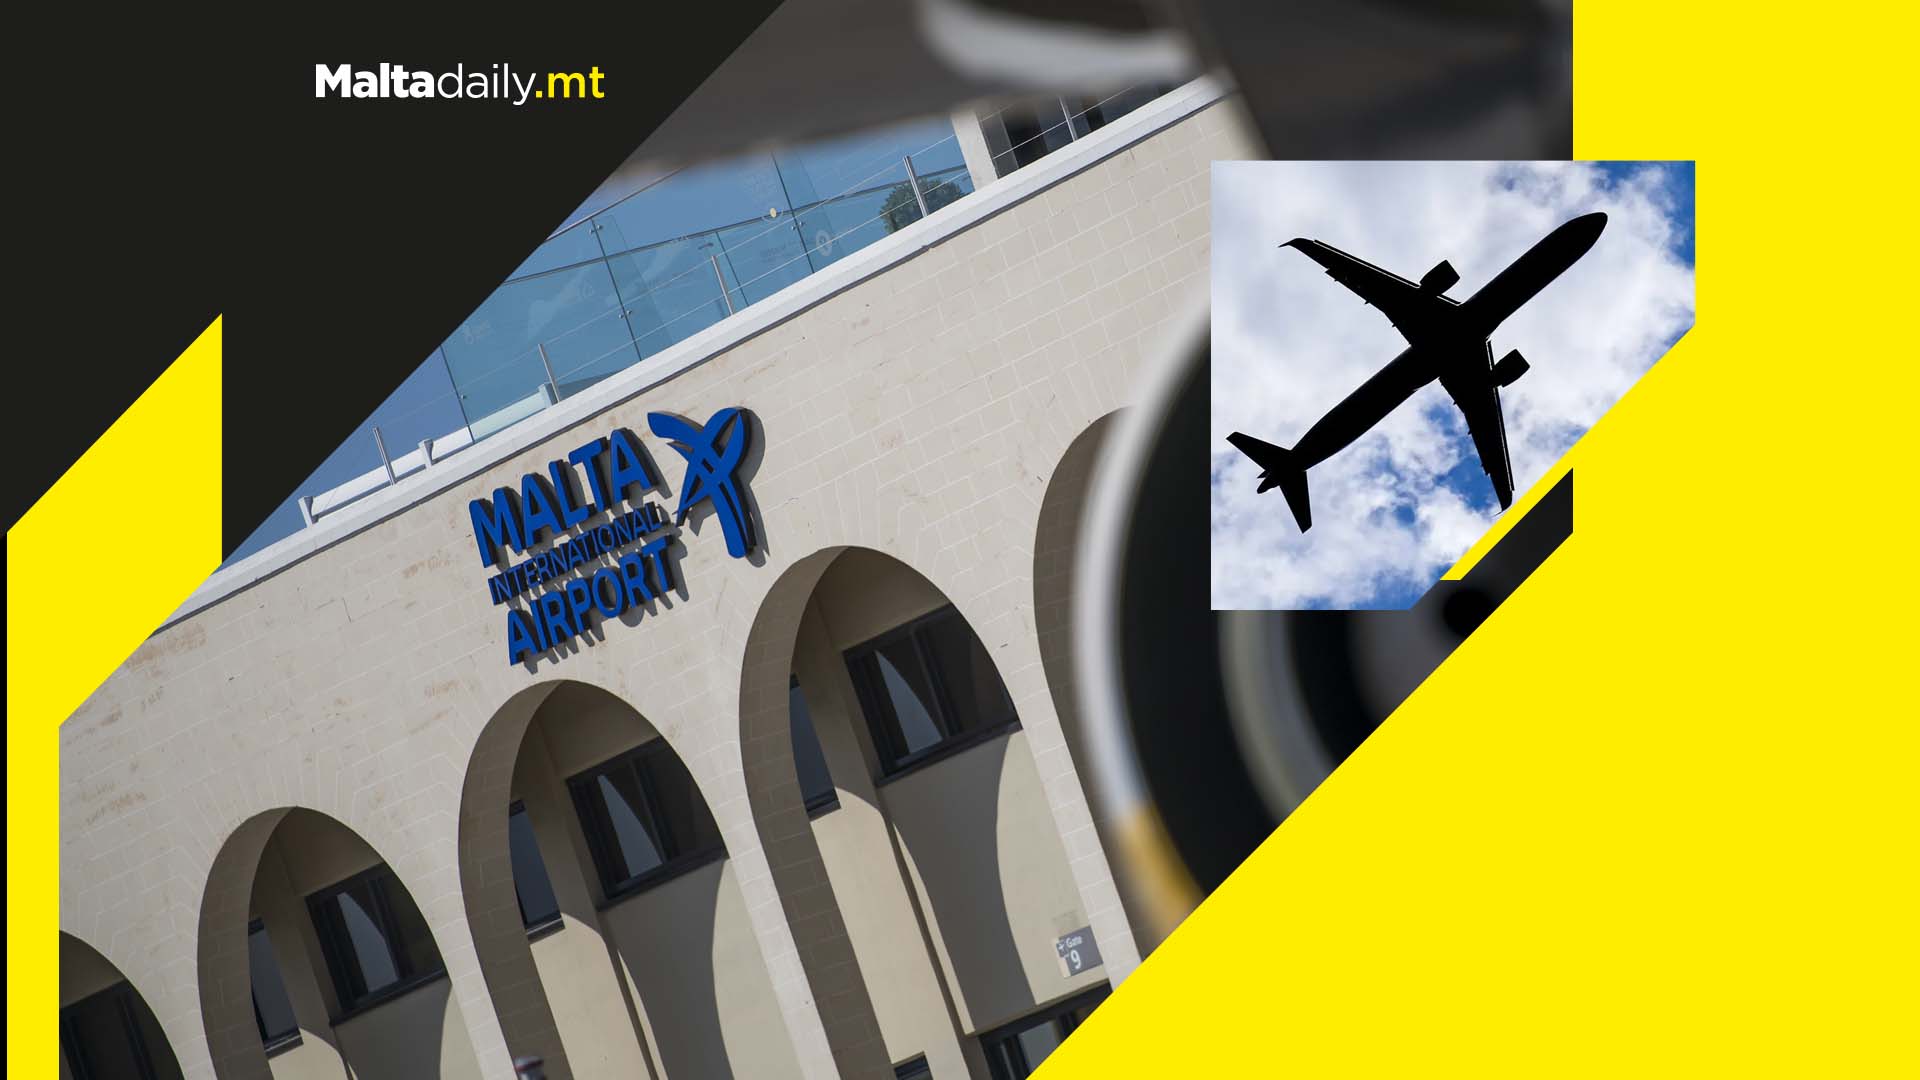 Malta Airport traffic for May just 18% below 2019 levels